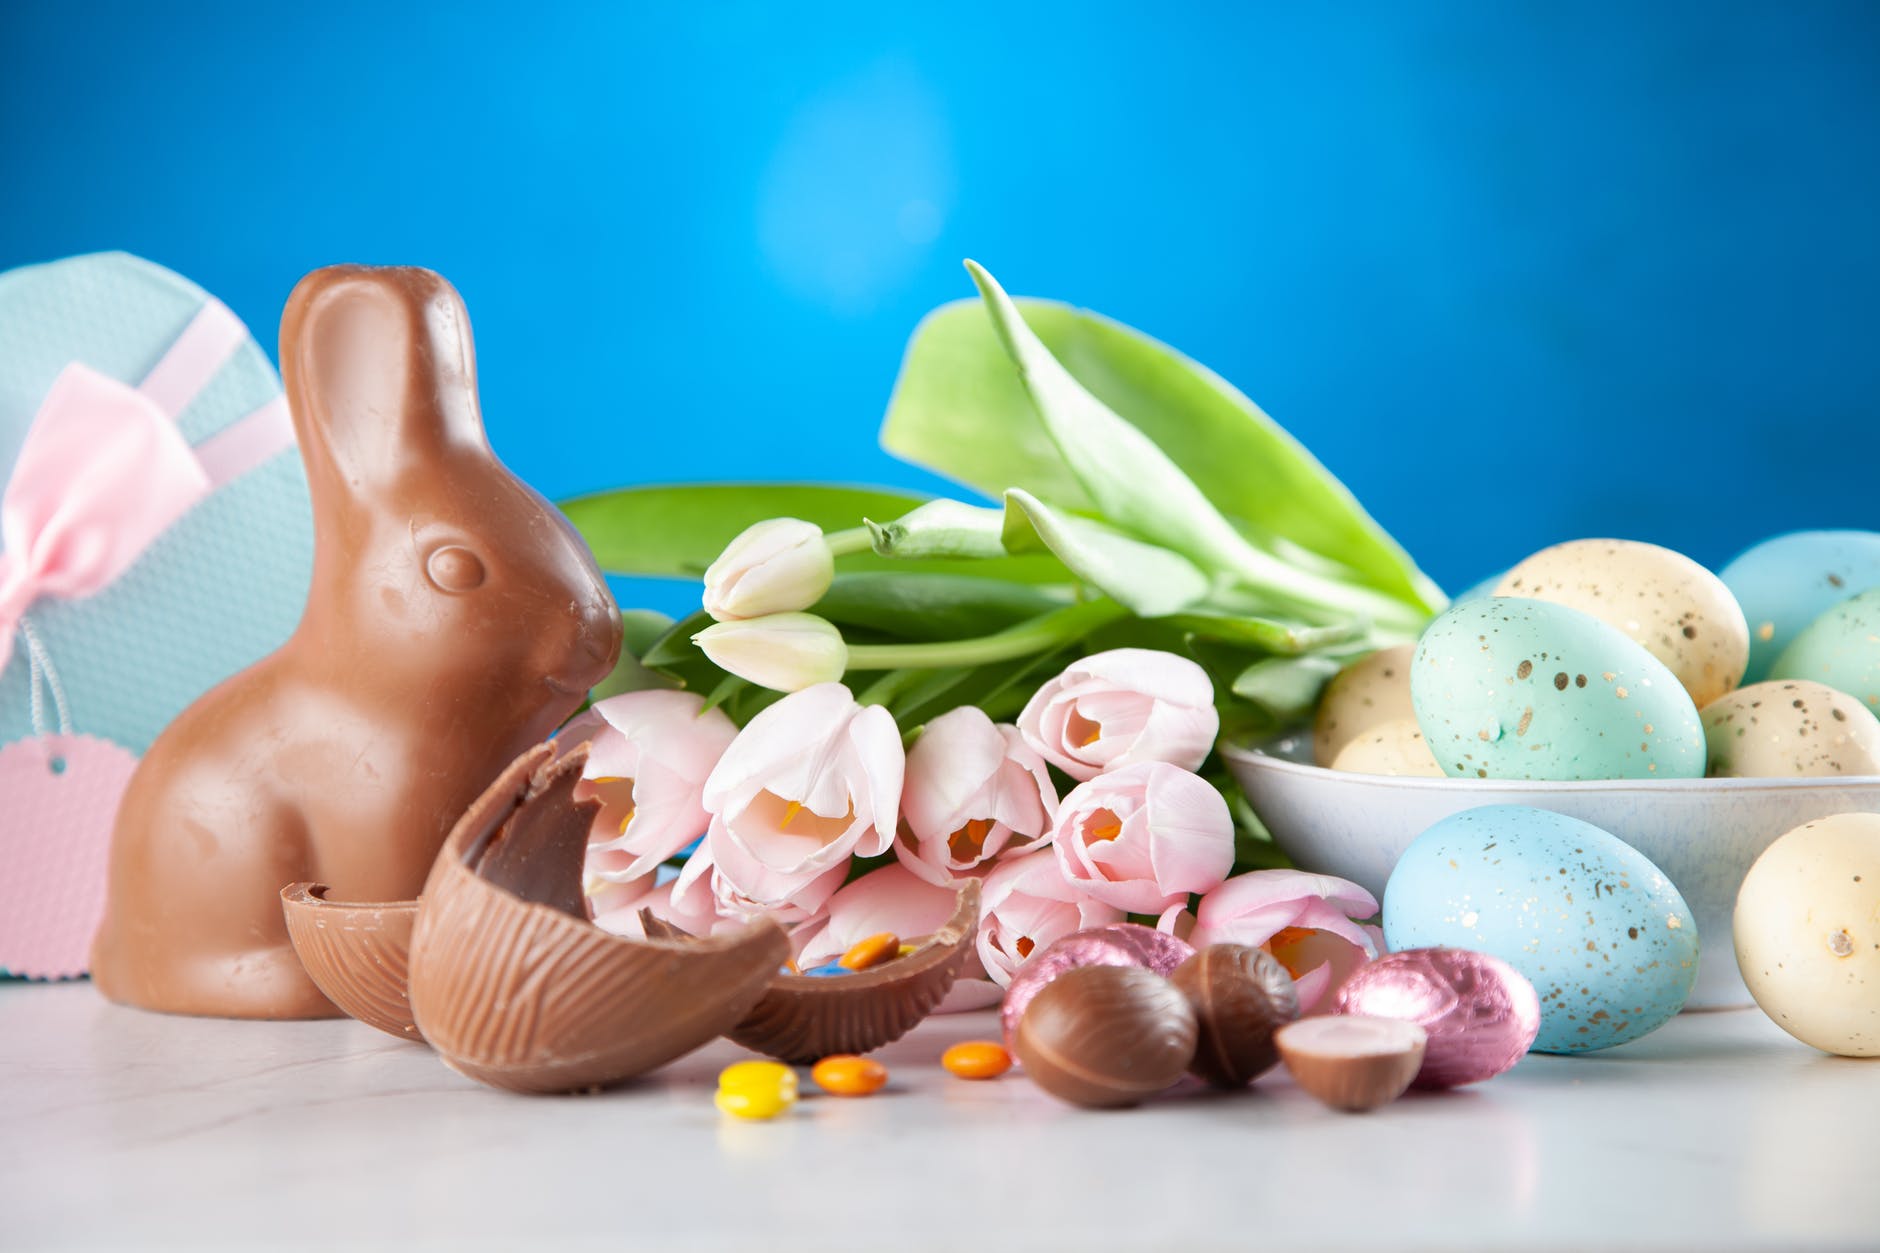 How To Decorate Your Home This Easter, When Should You Decorate Your Home For Easter